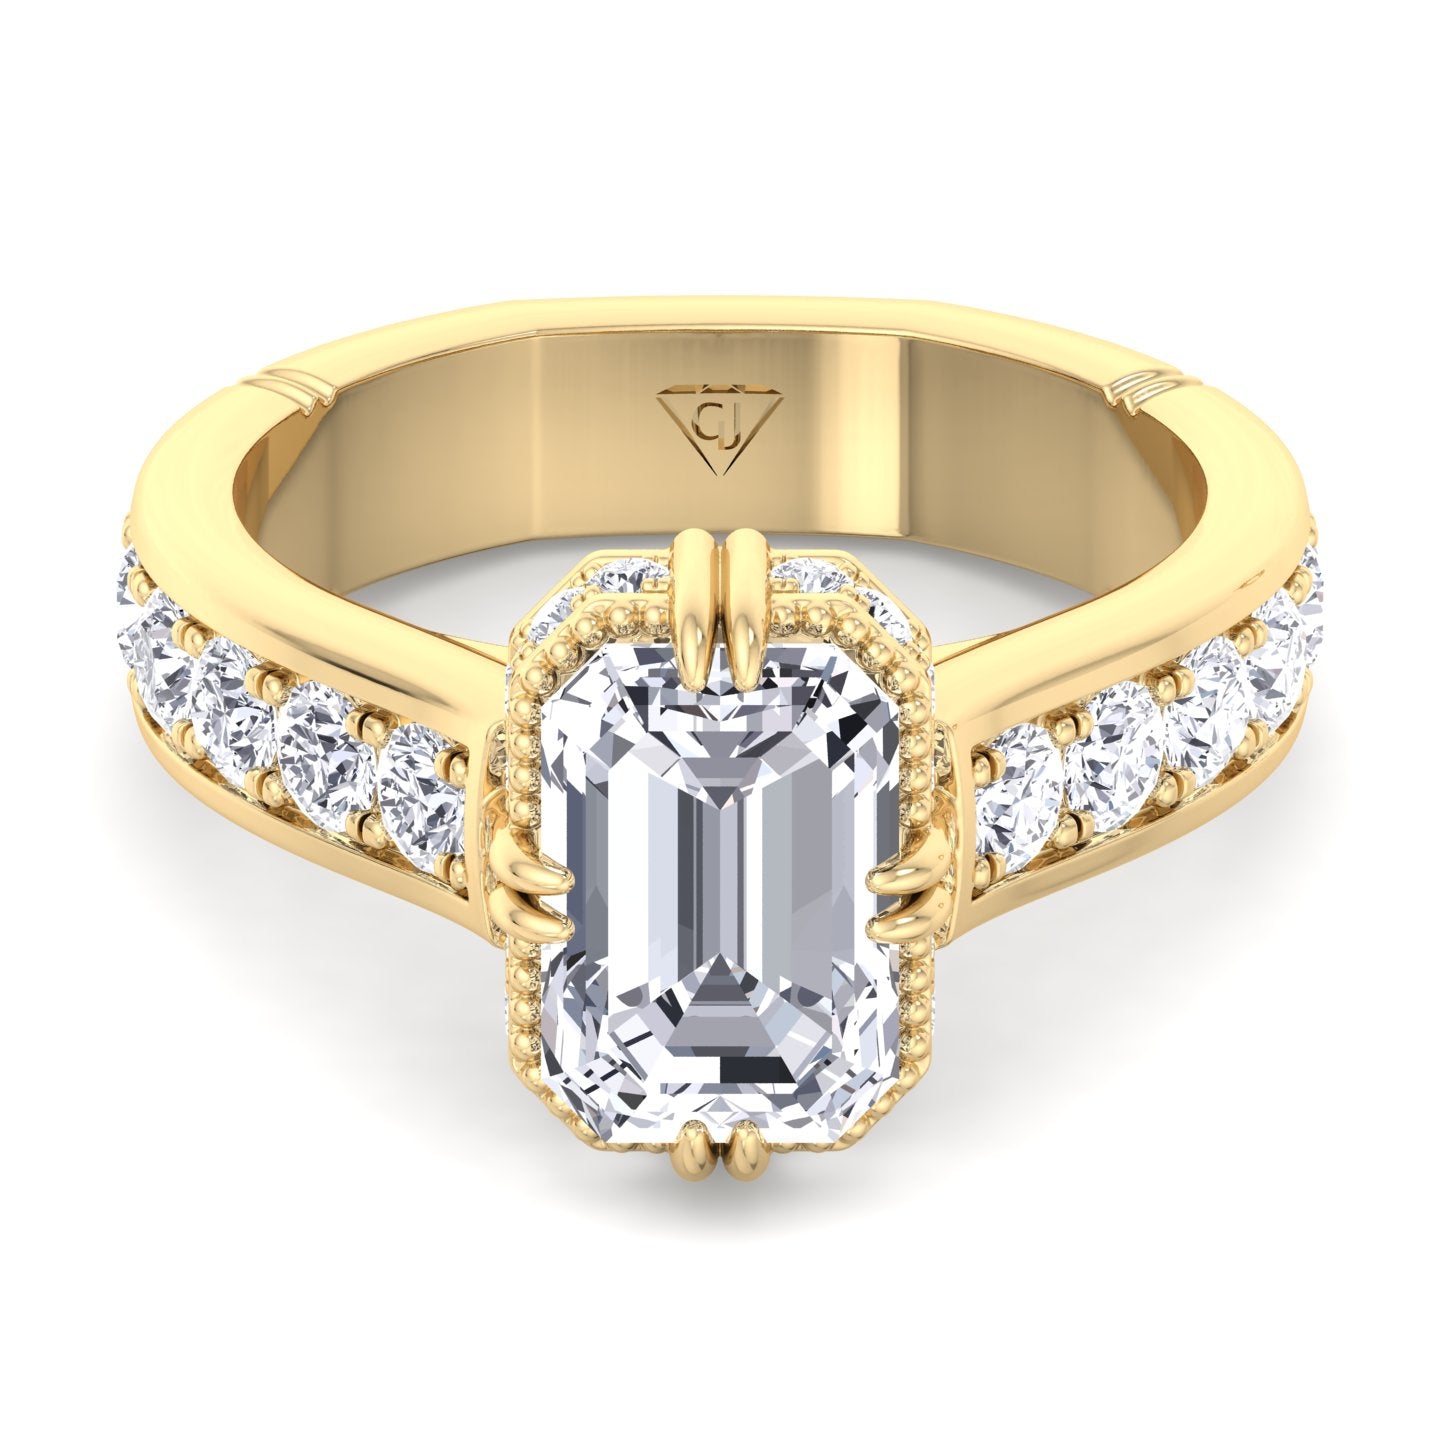 Bristol - Emerald Cut Diamond Engagement Ring with Side stones and Invisible Halo